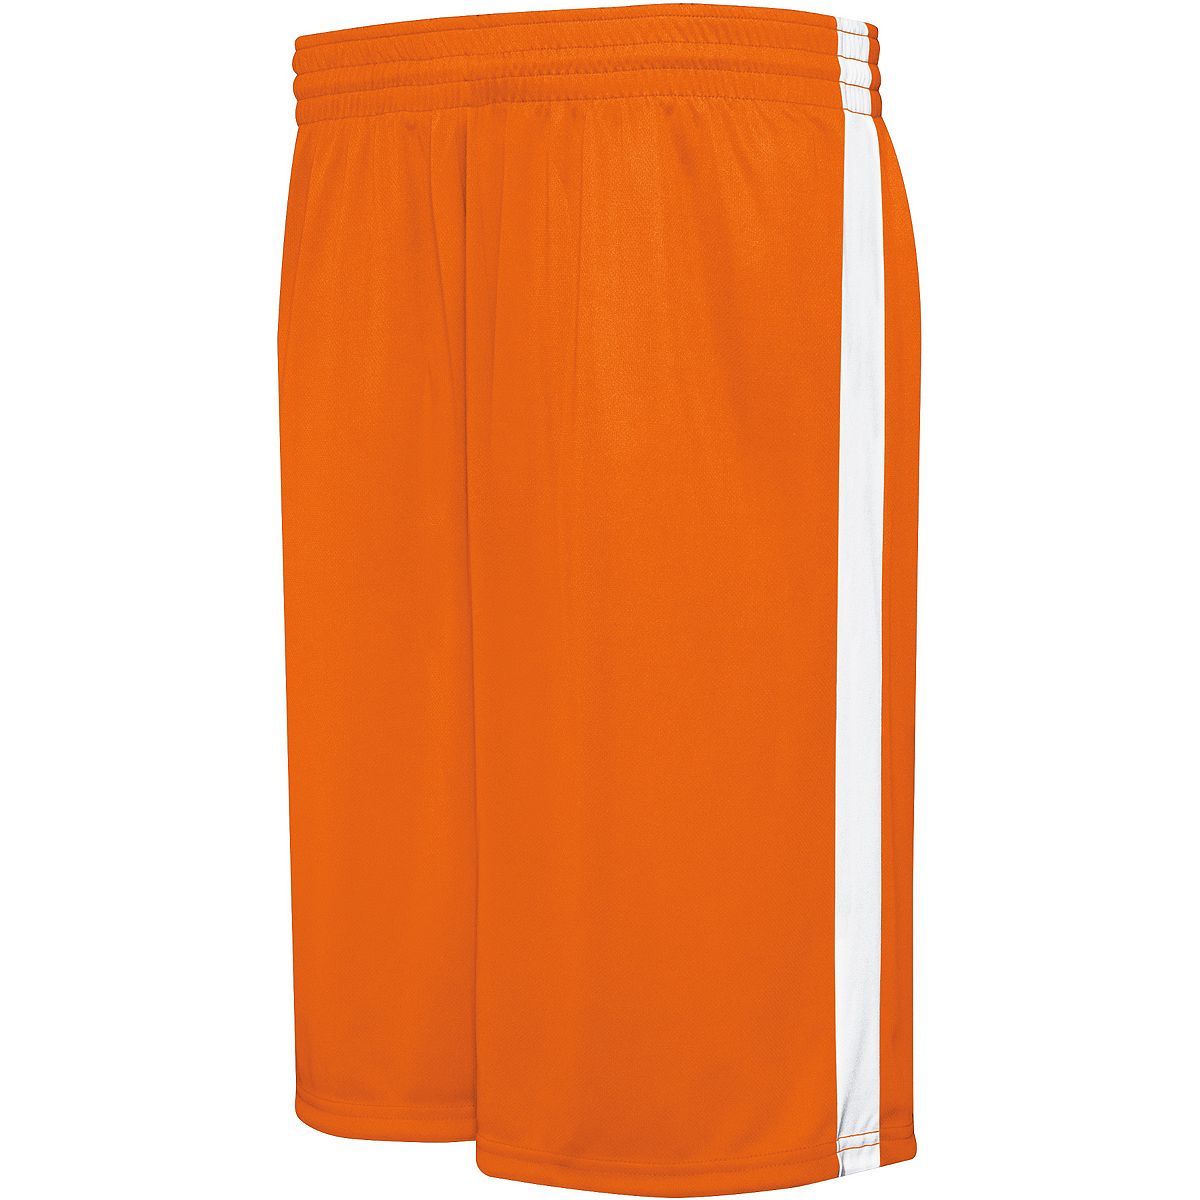 Augusta Sportswear Competition Reversible Shorts in Orange/White  -Part of the Adult, Adult-Shorts, Augusta-Products, Basketball, All-Sports, All-Sports-1 product lines at KanaleyCreations.com